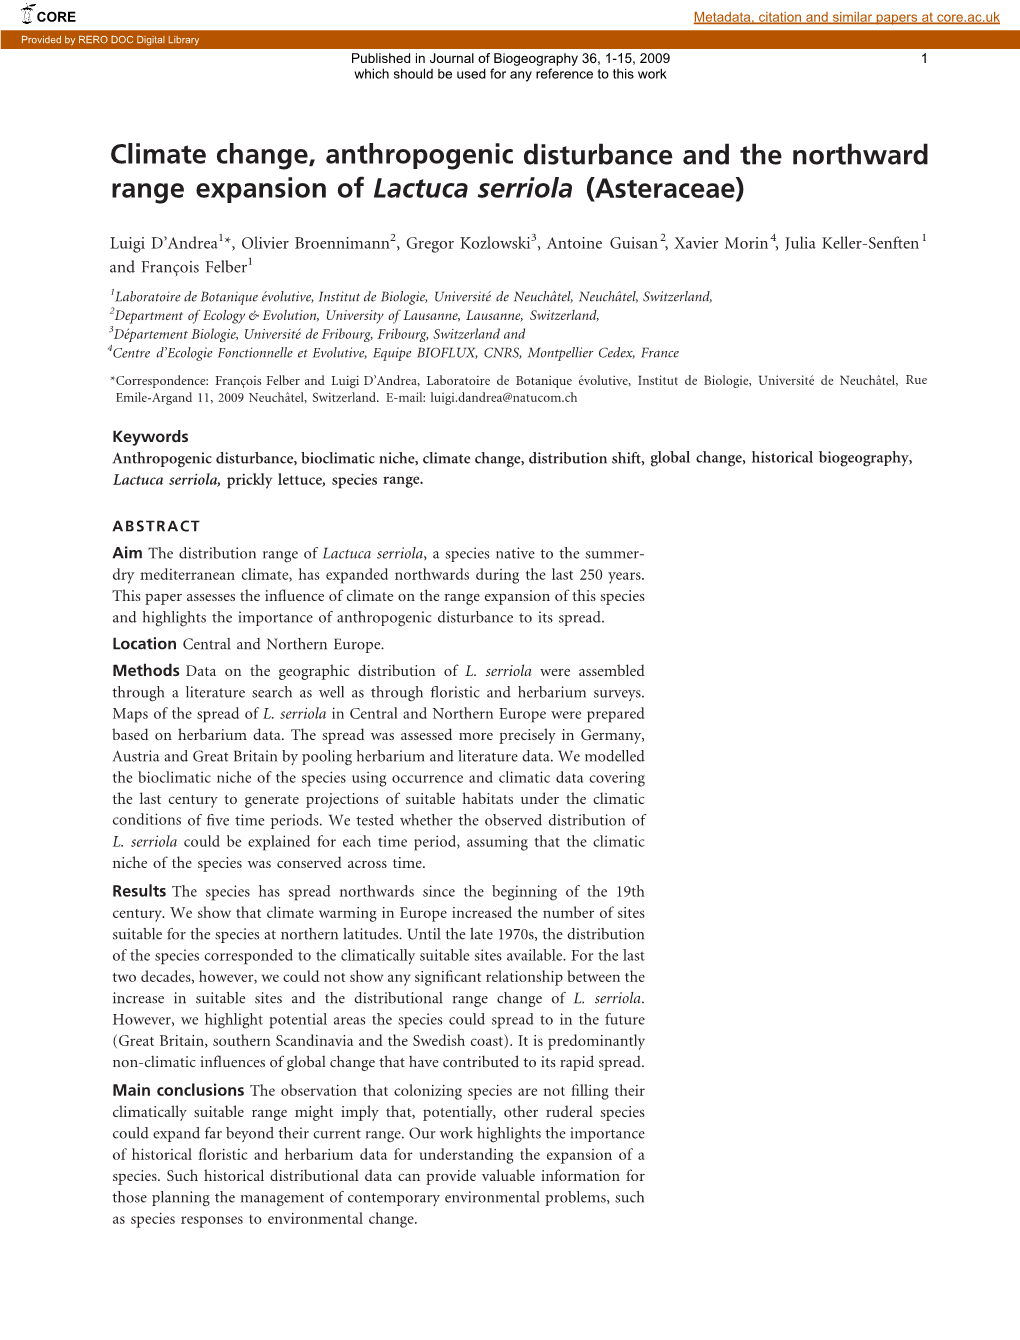 Climate Change, Anthropogenic Disturbance and the Northward Range Expansion of Lactuca Serriola (Asteraceae)